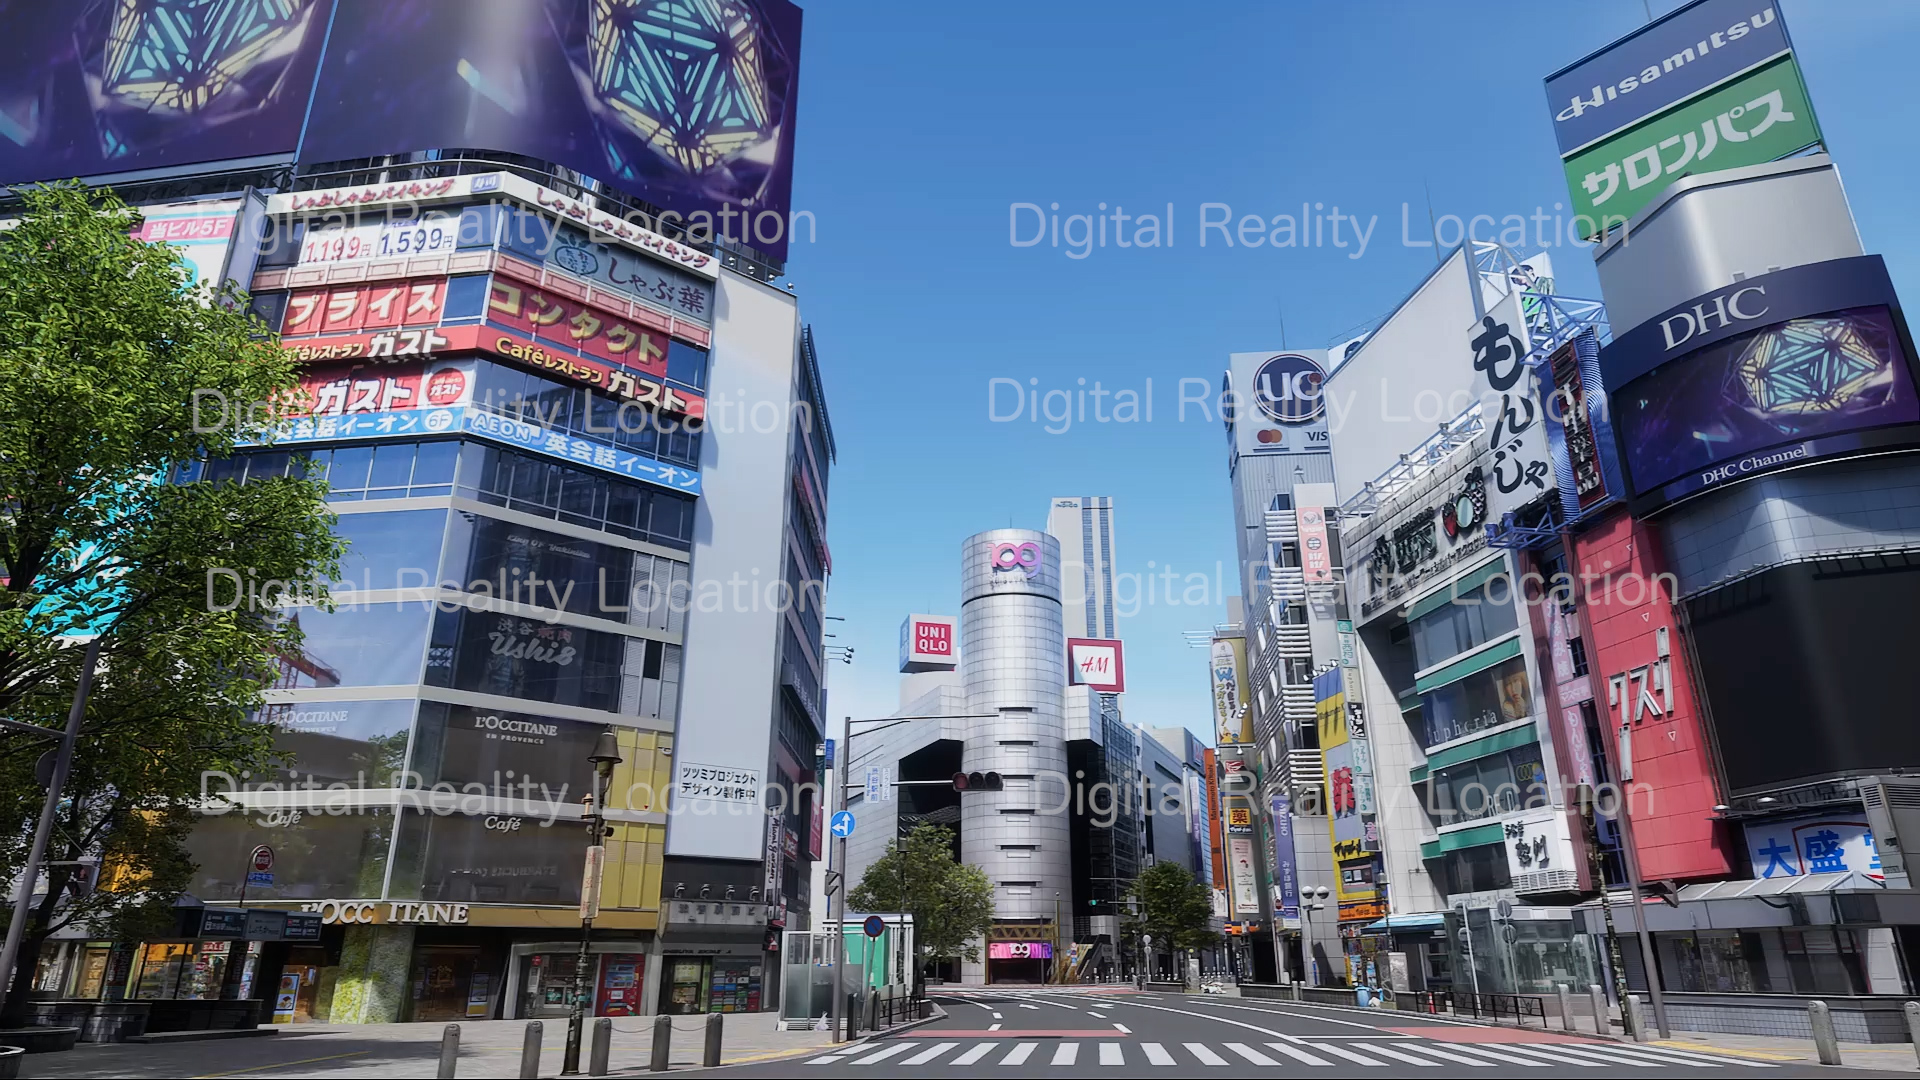 The scramble crossing was realistically produced! “Digital Reality Location” The Shibuya area has been updated to the 2023 design. The updated Shinjuku Kabukicho and Cyber Shibuya have been also put to your use!